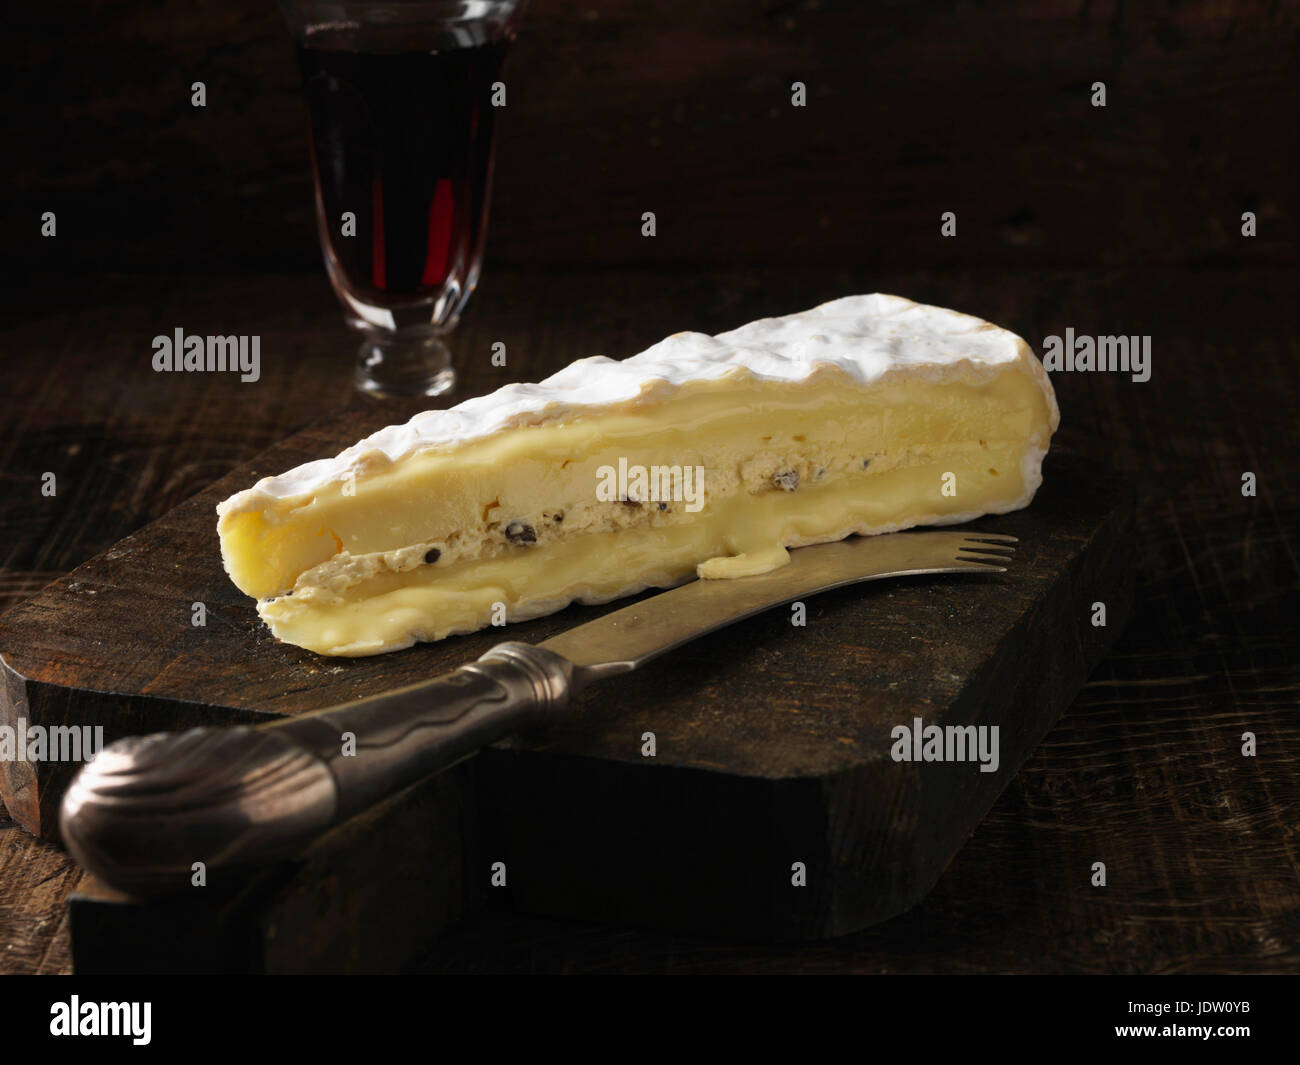 Slice of brie cheese on wooden board Stock Photo